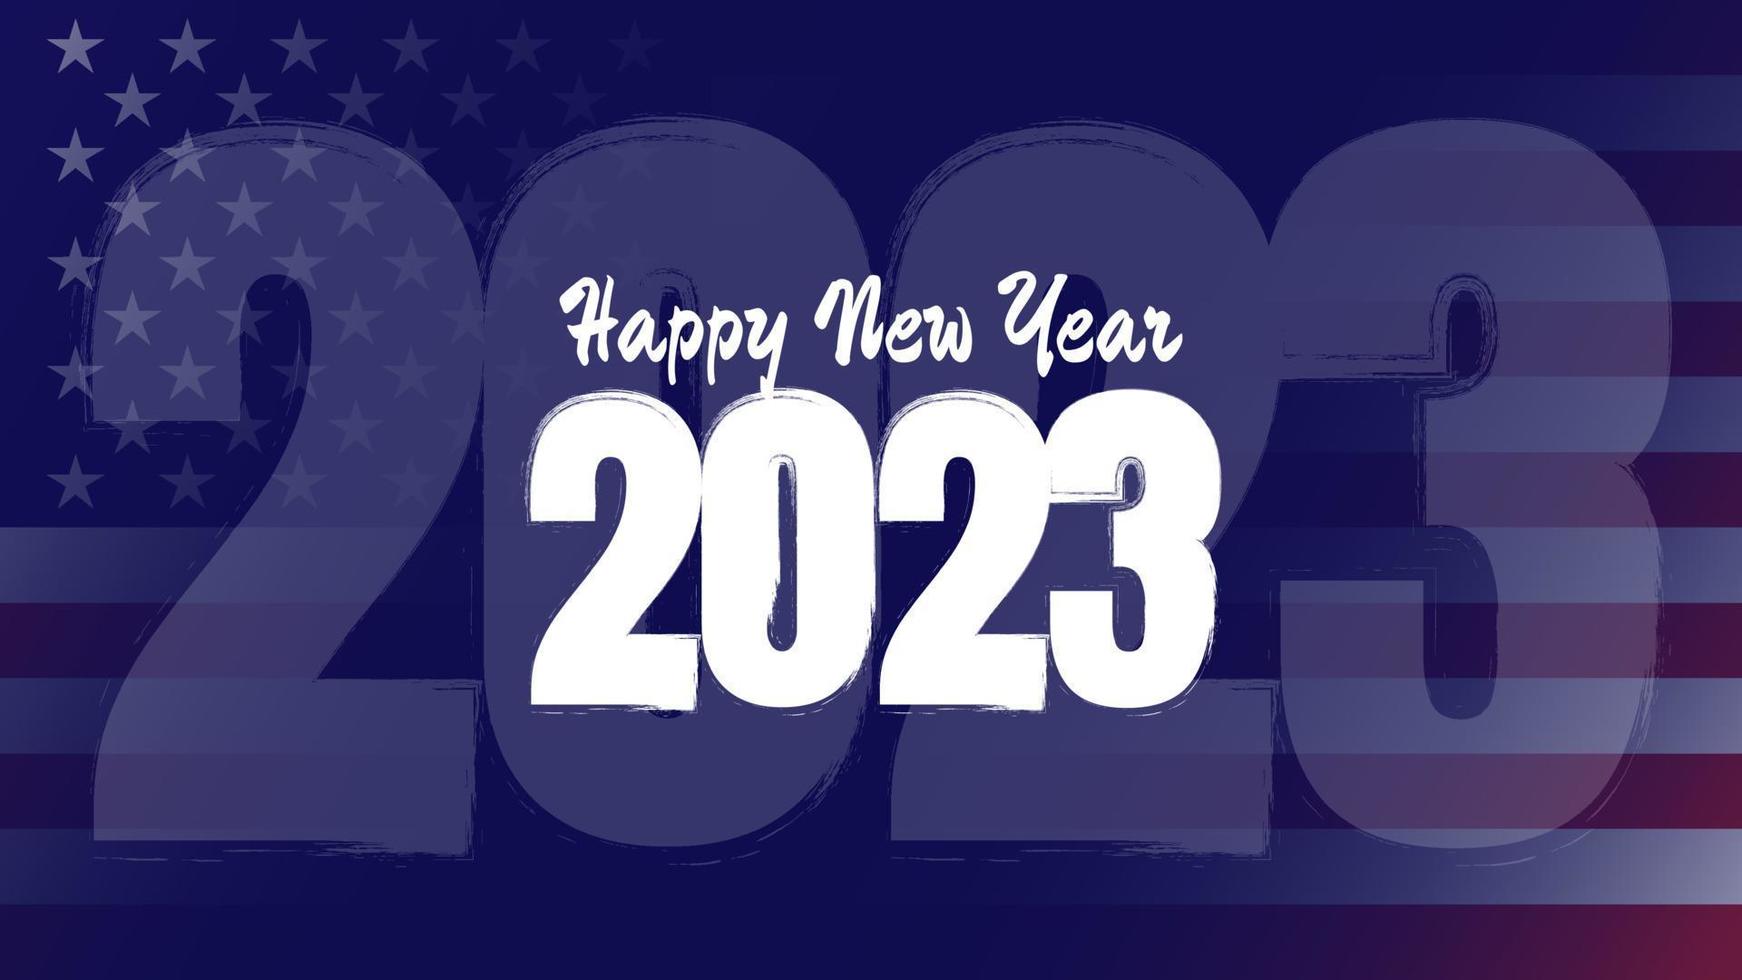 Happy New Year 2023 with United State flag background. Suitable for banner, poster, greeting card, etc vector